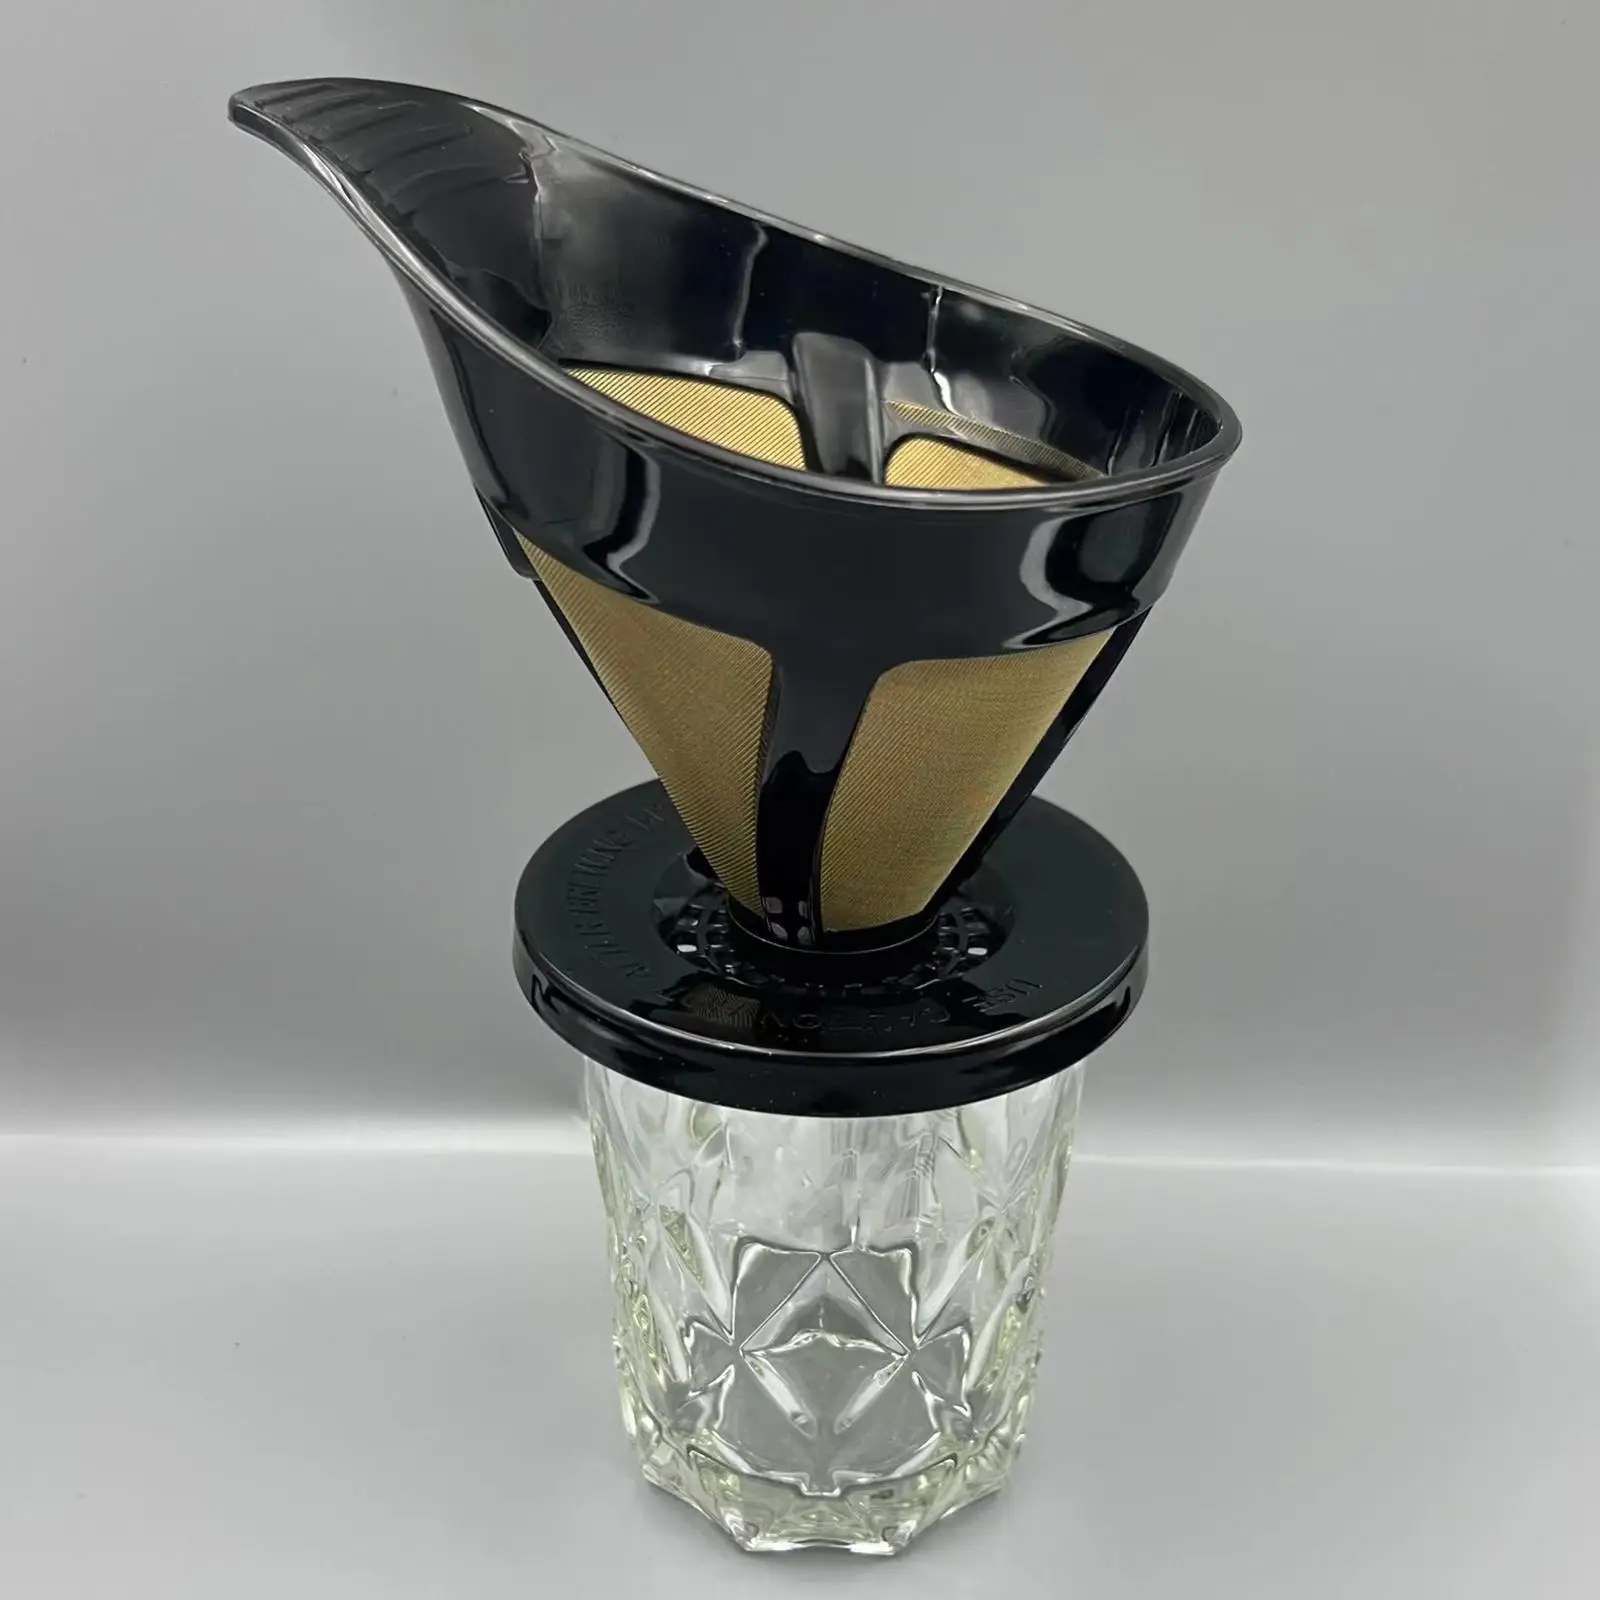 Pour Over Coffee Cone Dripper Mesh Filter Extraction Coffee Brew Maker for Hiking